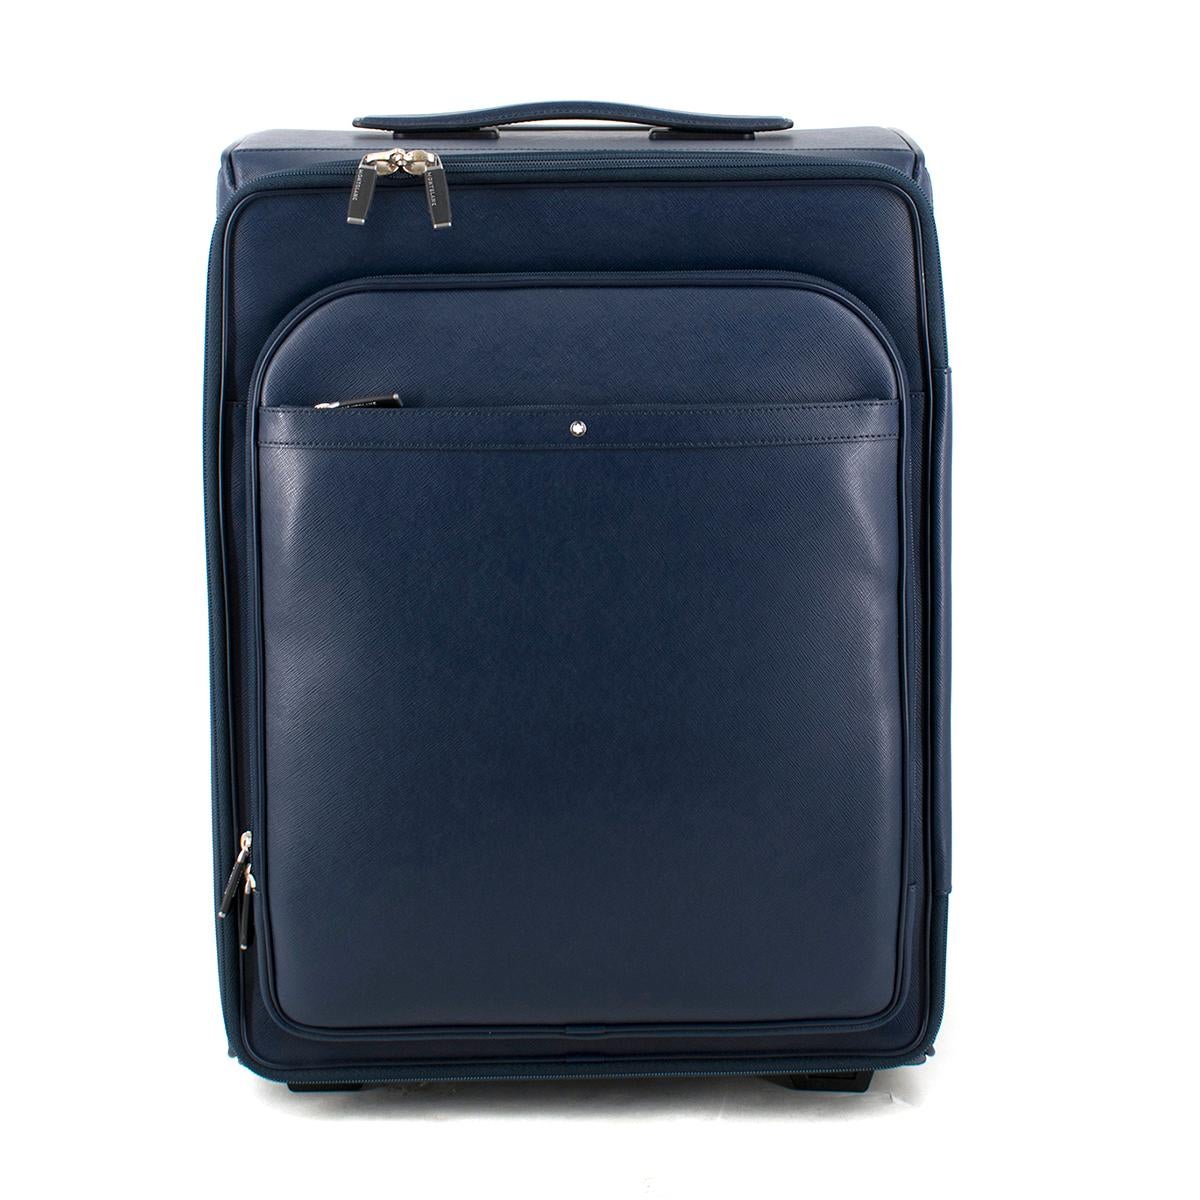 Montblanc Navy Leather Sartorial Trolley

Material: Italian split calfskin.
Lining: Jaquard lining with Montblanc brand name.
Closure/Lock: 2 Zips with kissing sliders.
Pockets: Front zipped compartment with inner pocket, zipped front pocket, zipped